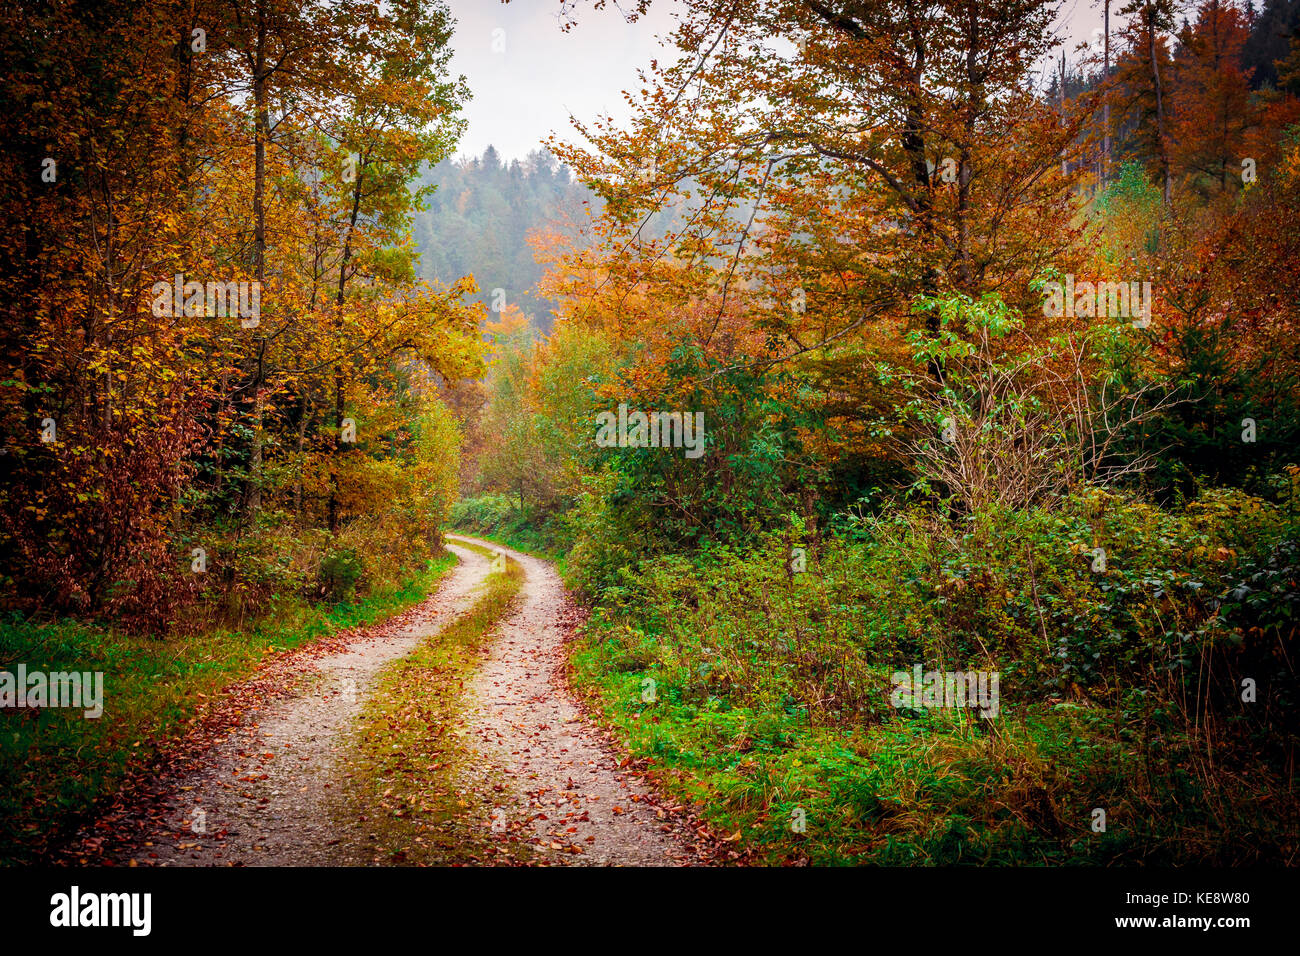 The Kobernausser Wald is the largest woodland area in Central Europe. Stock Photo